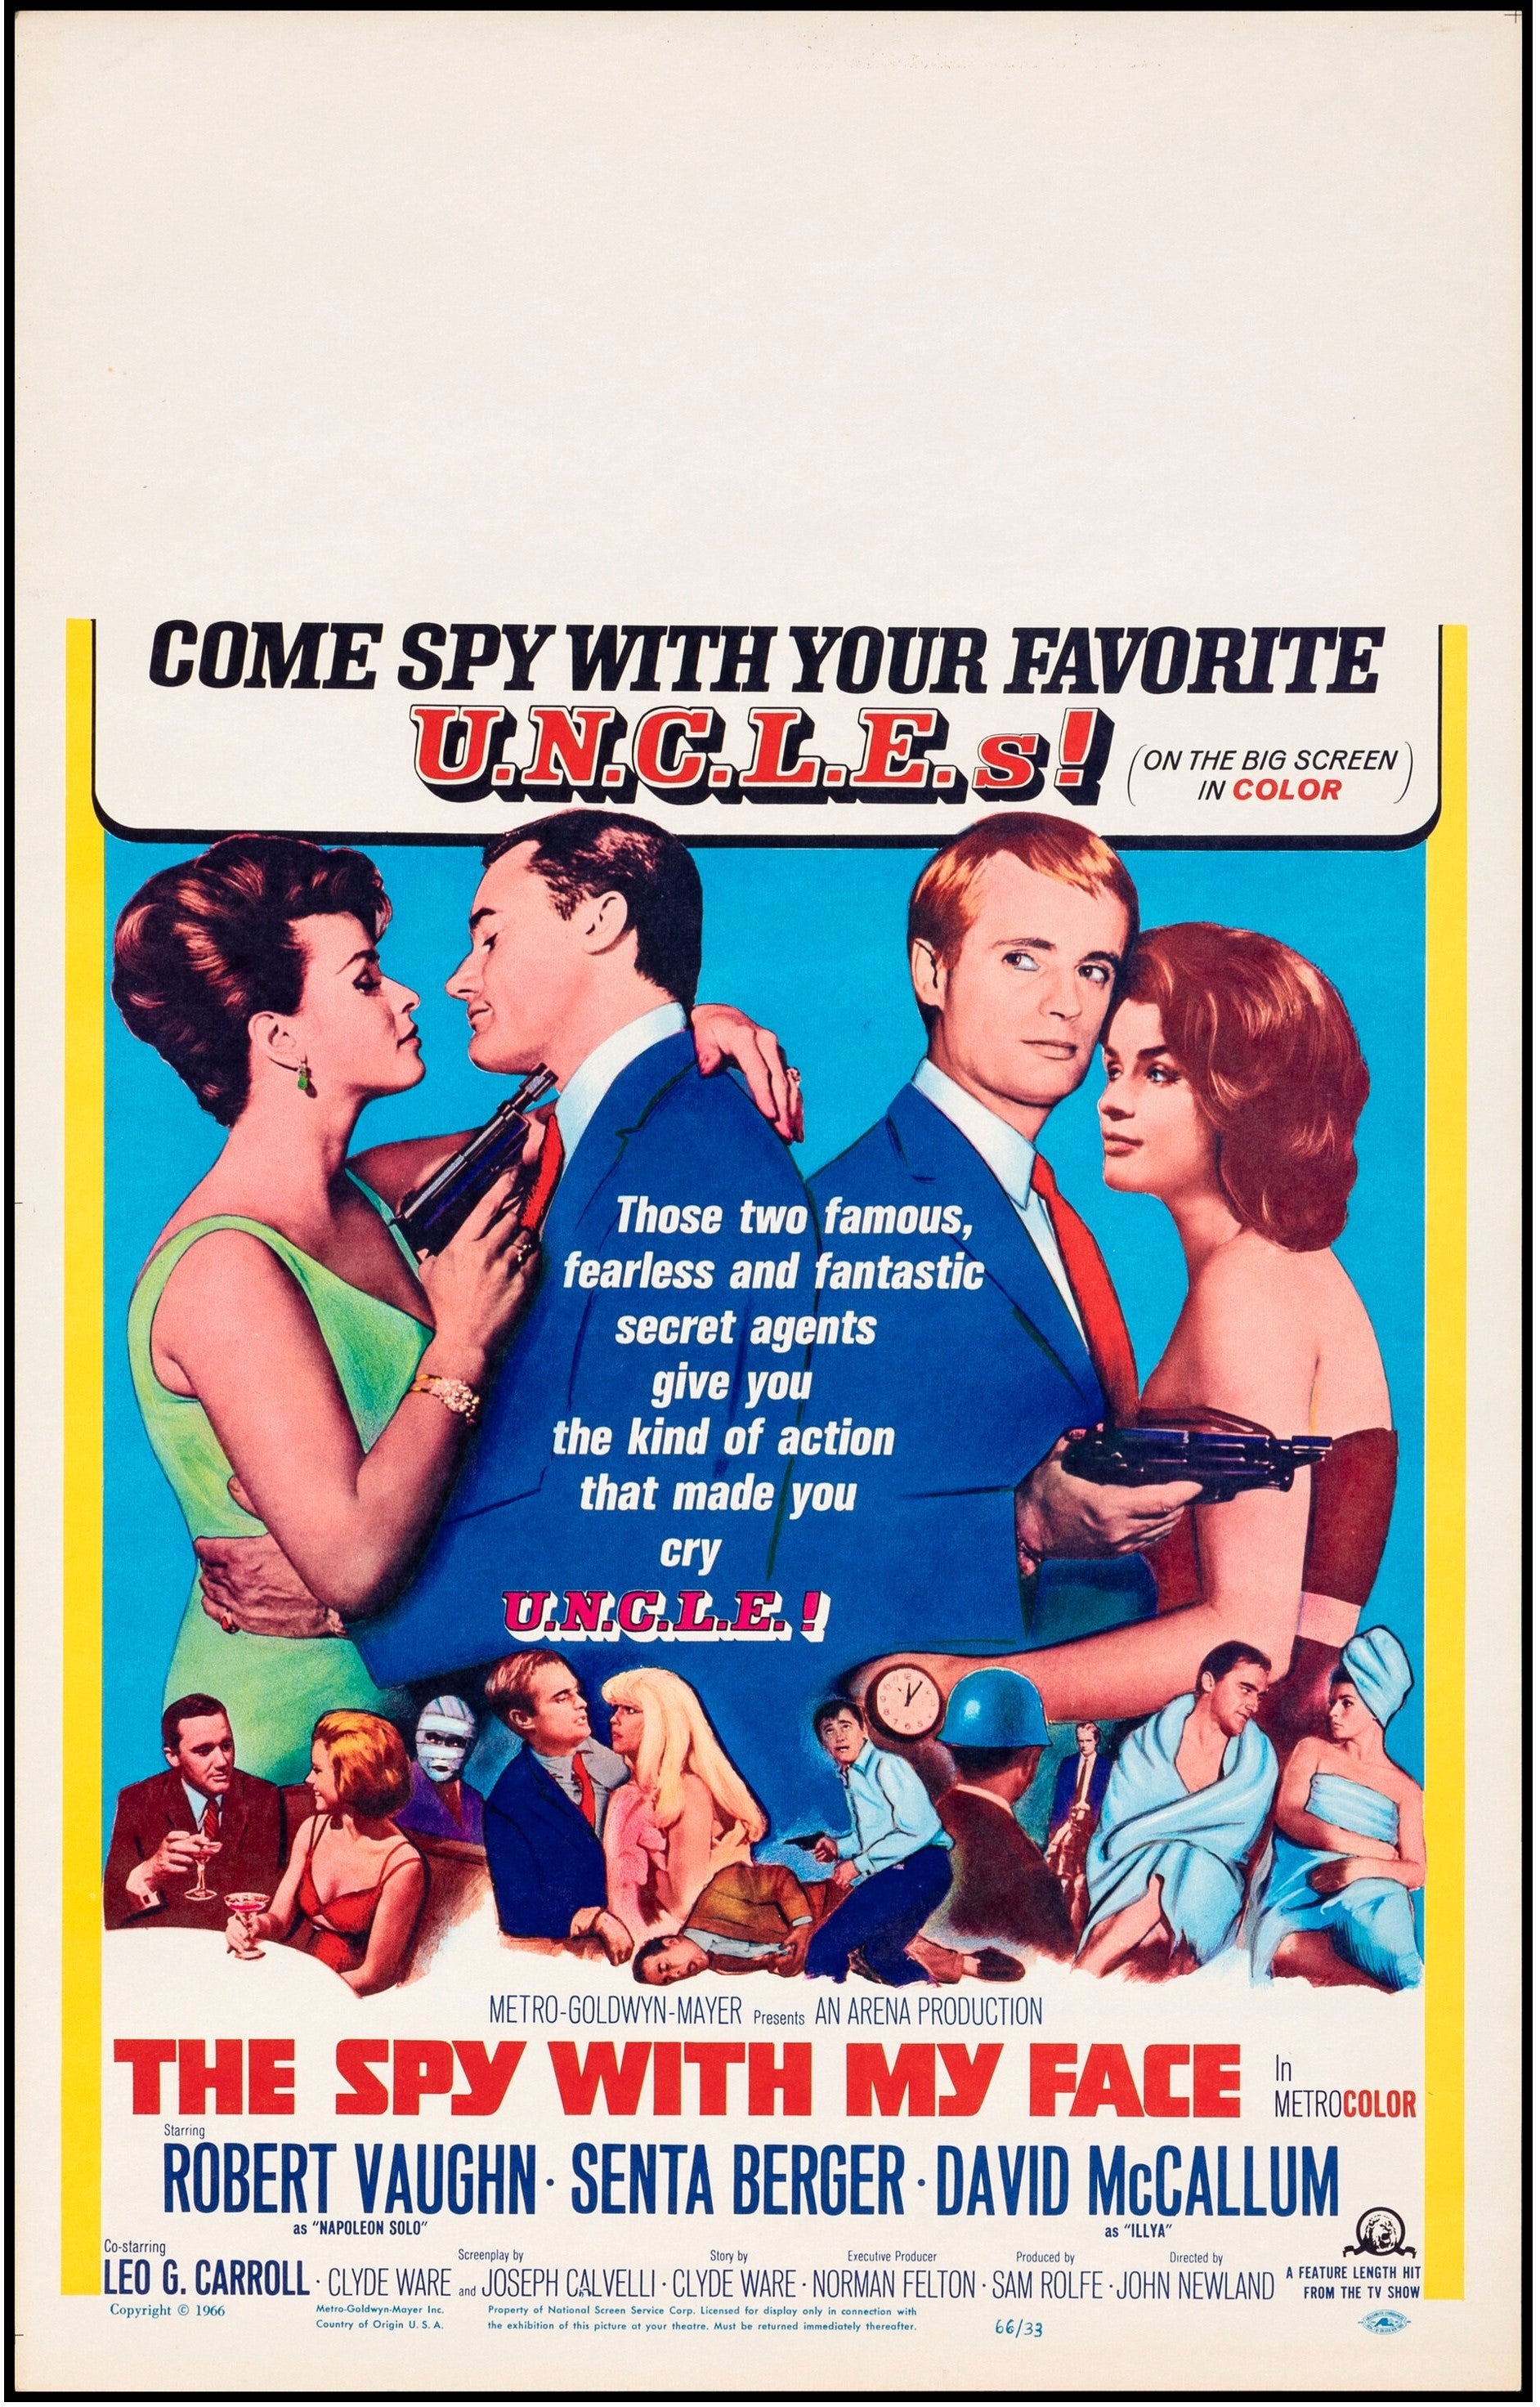 THE SPY WITH MY FACE (1966)